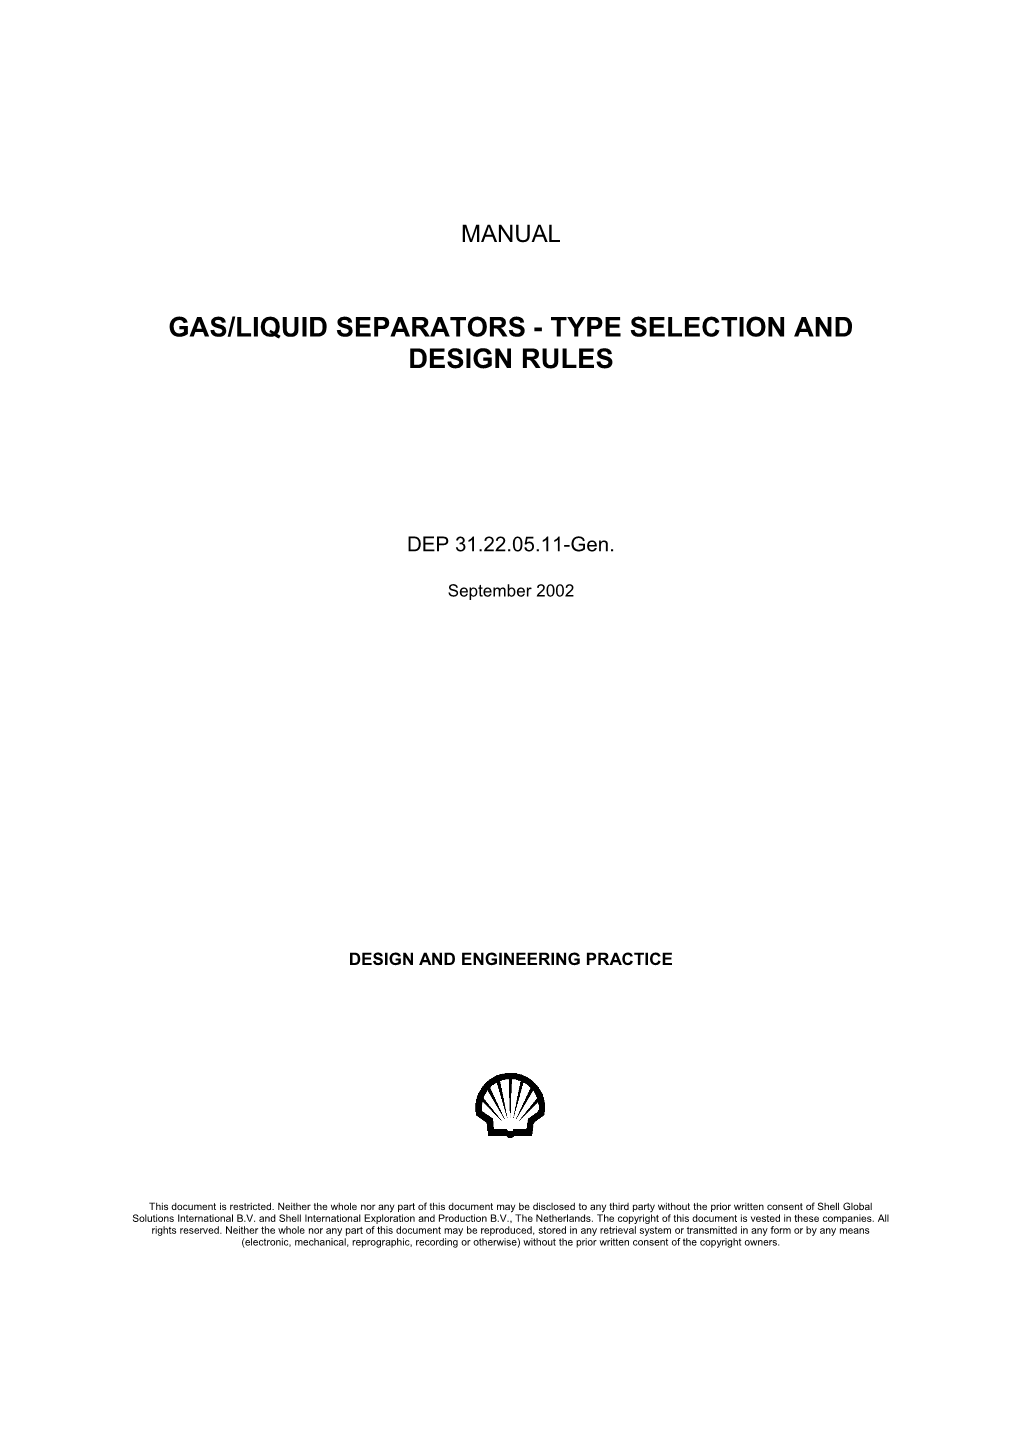 Gas/Liquid Separators - Type Selection and Design Rules